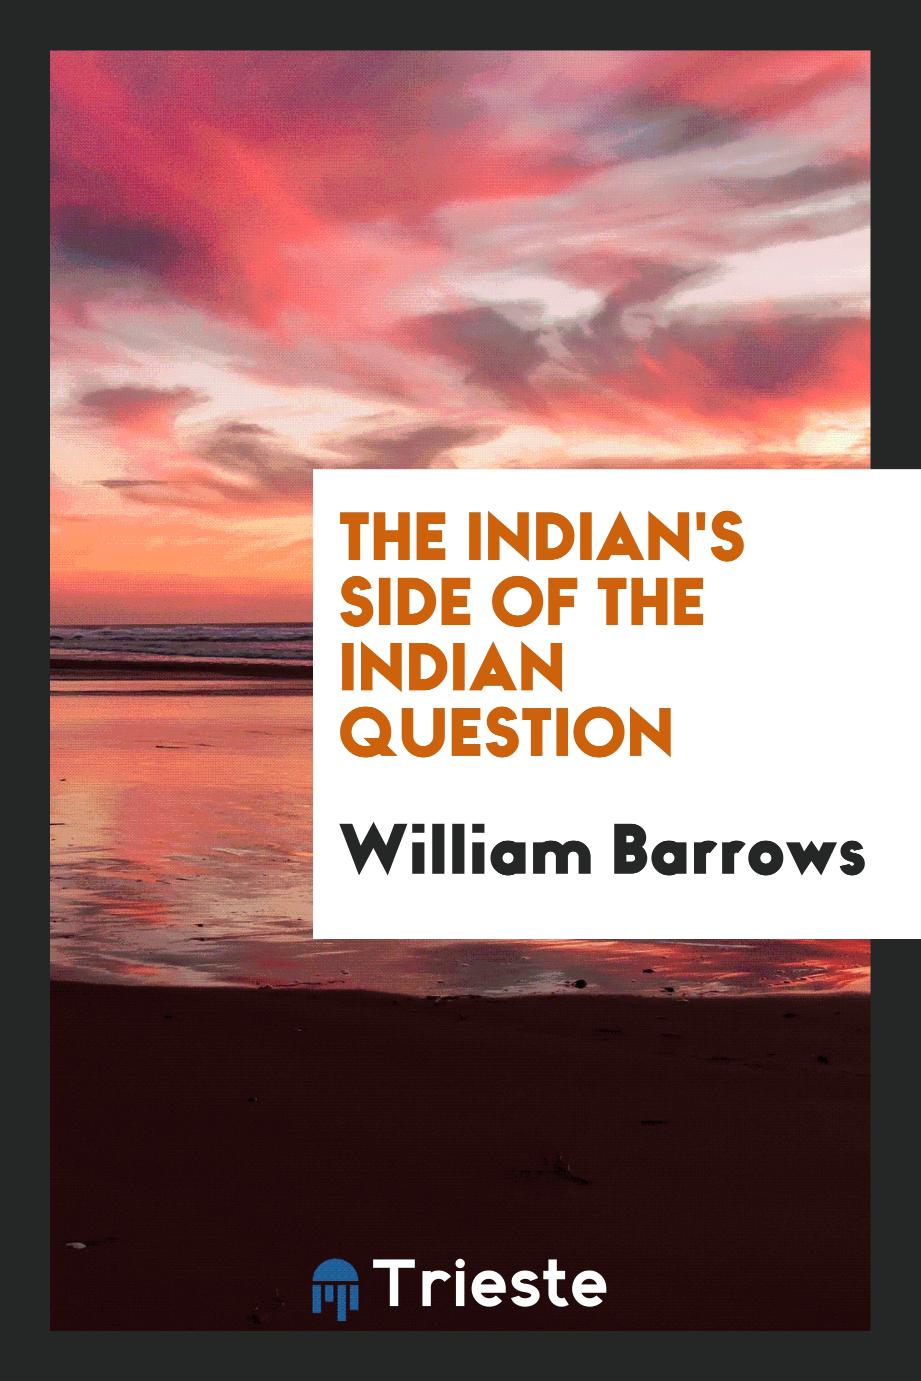 The Indian's side of the Indian question